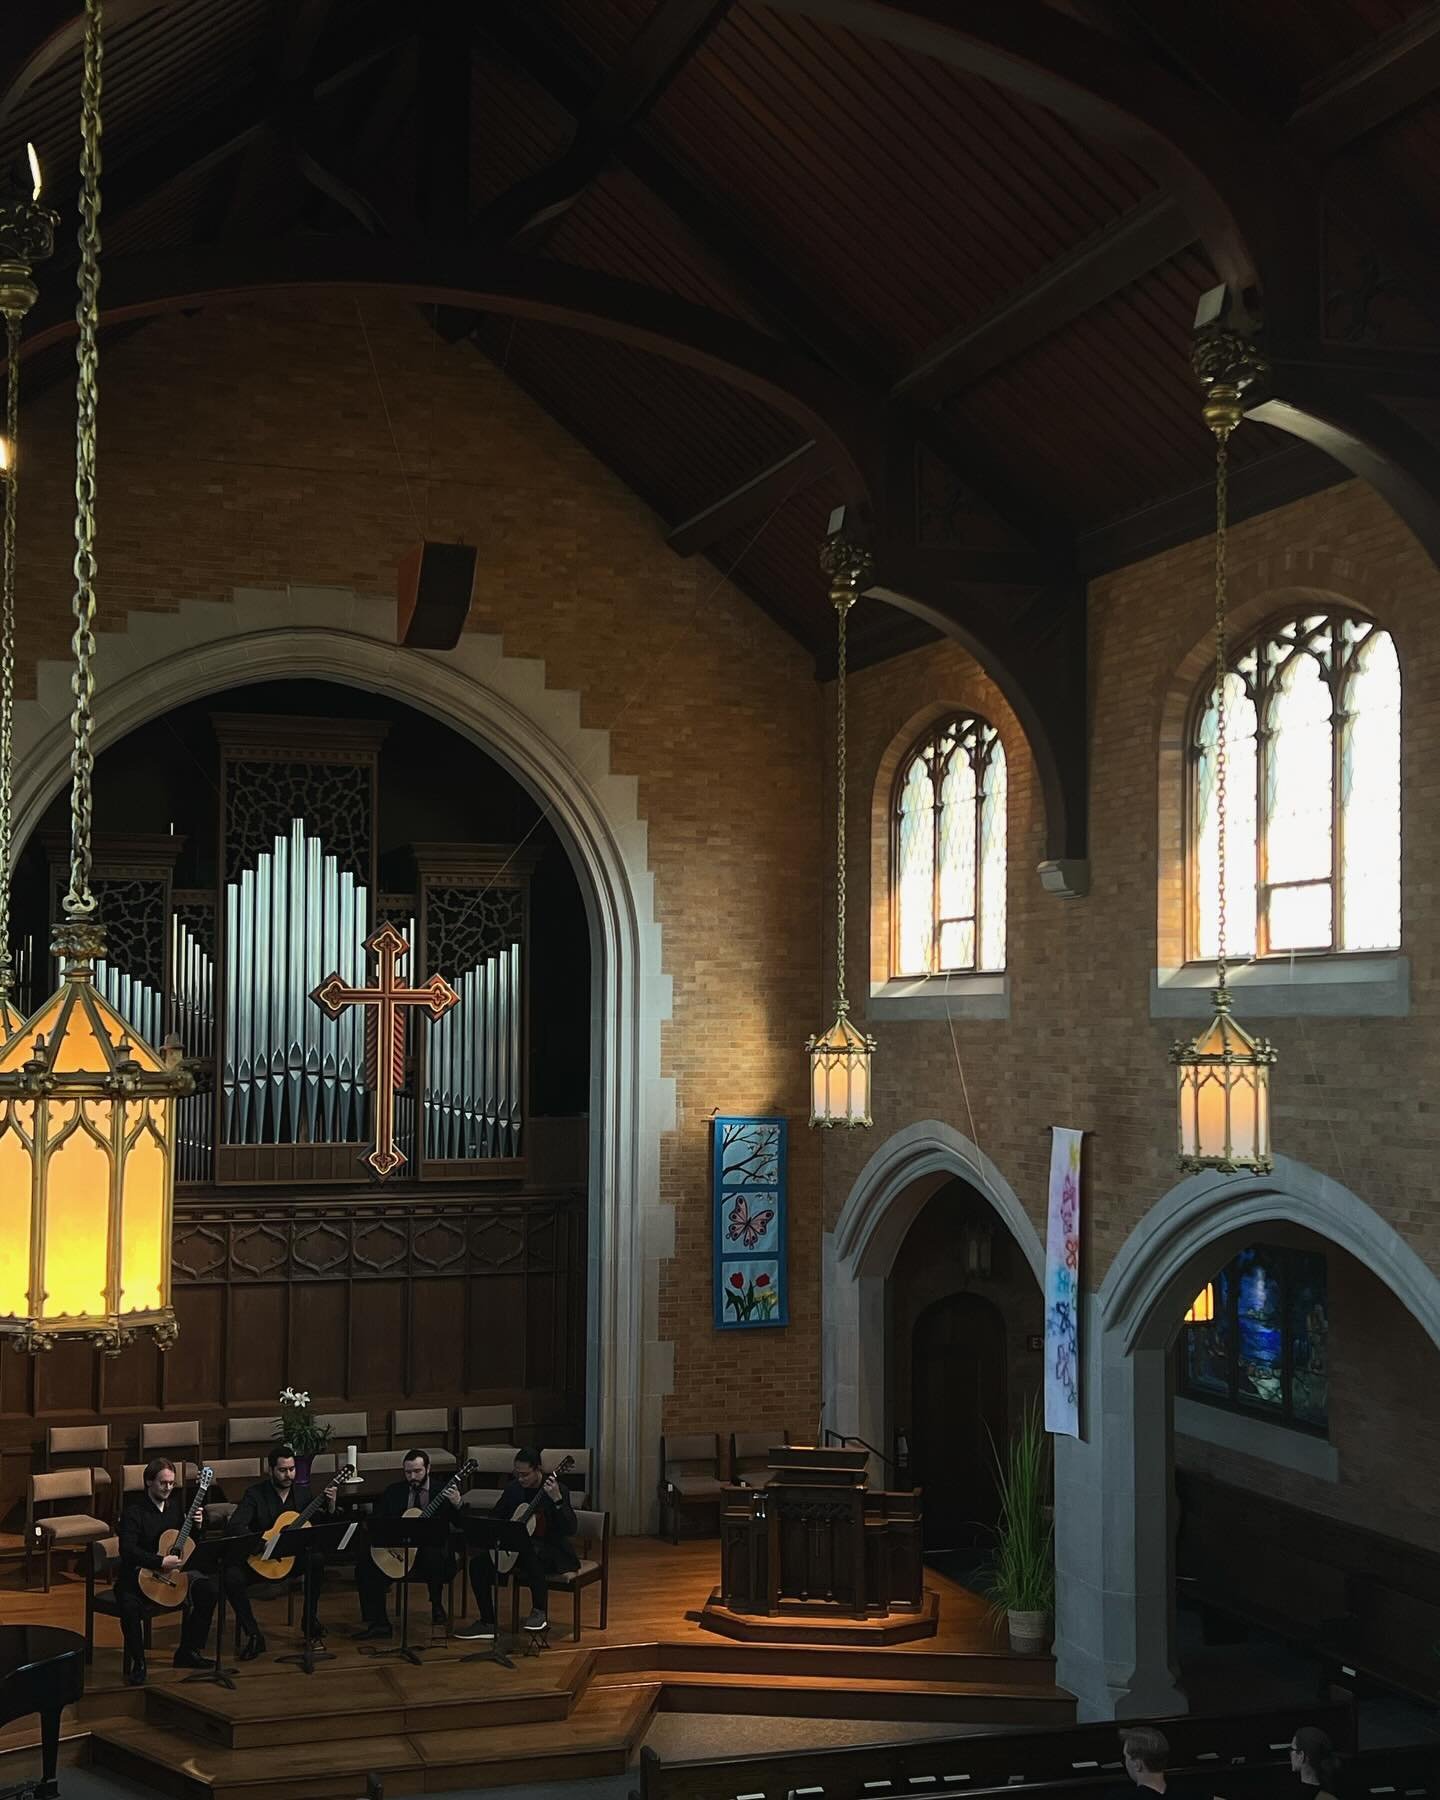 Plymouth Church is such a gorgeous concert venue and a joy to perform in &mdash; check out these shots from our first Spring studio recital! 

Our next recital will be on Tuesday, April 23 at Kingo Lutheran Church, starting at 7:30 pm. We hope to see